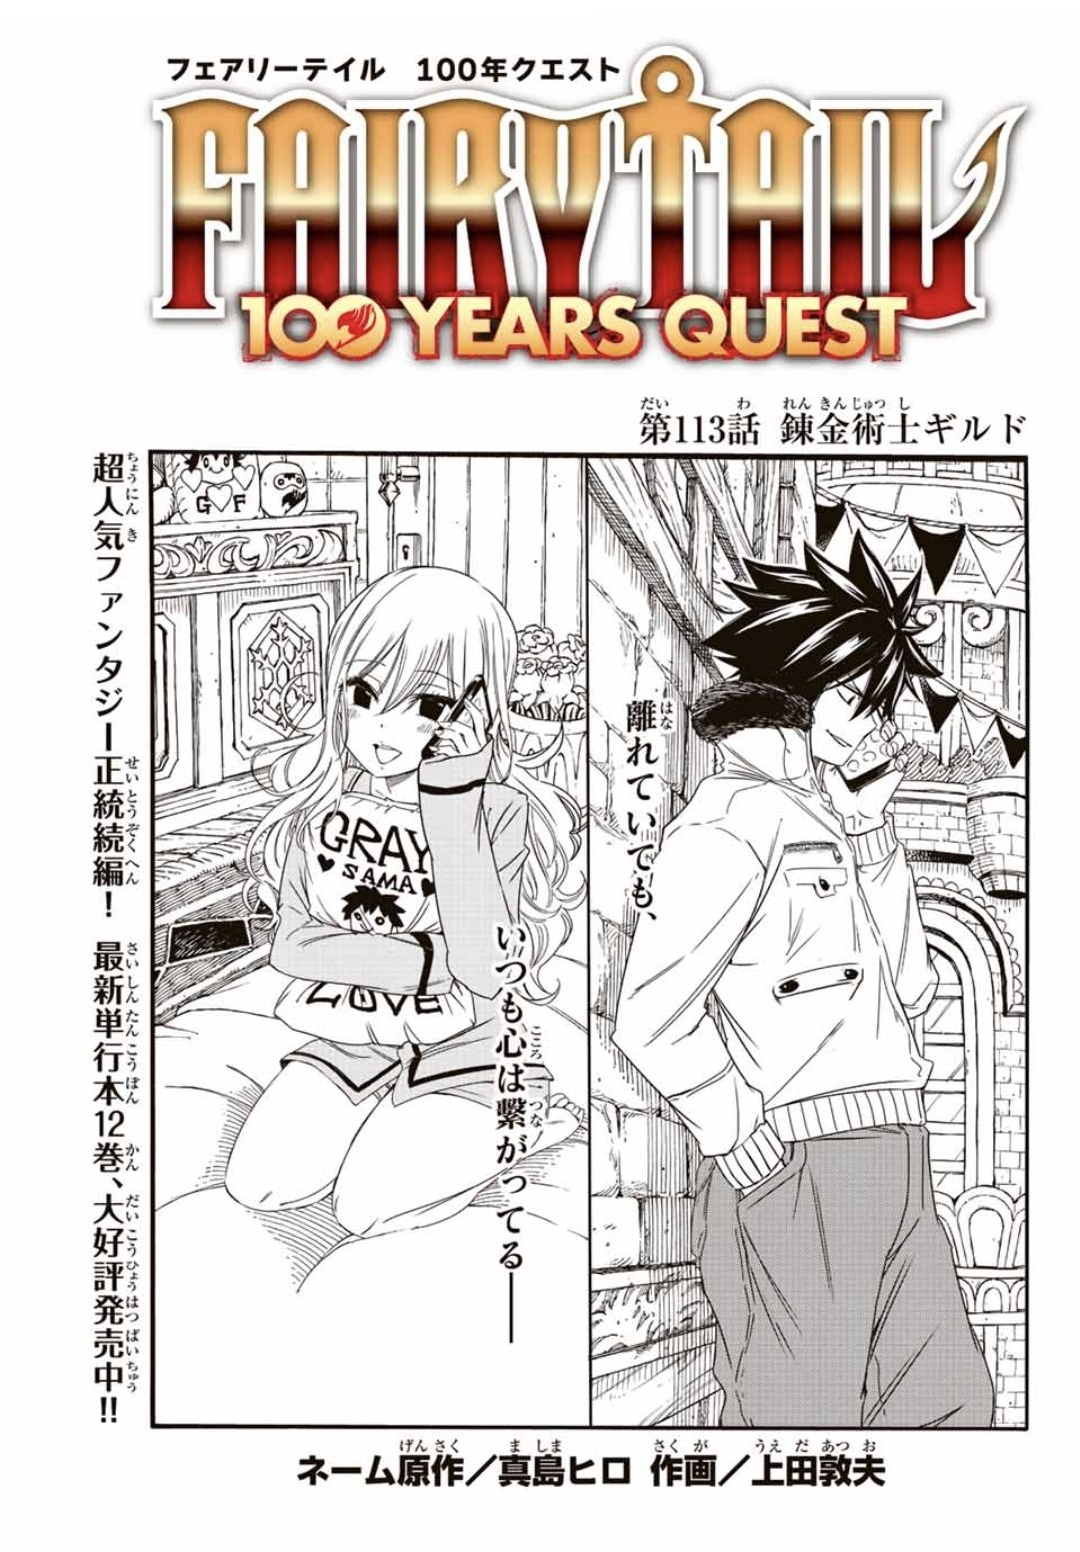 Fairy Tail: 100 Years Quest/Chapter 064 - Anime Bath Scene Wiki